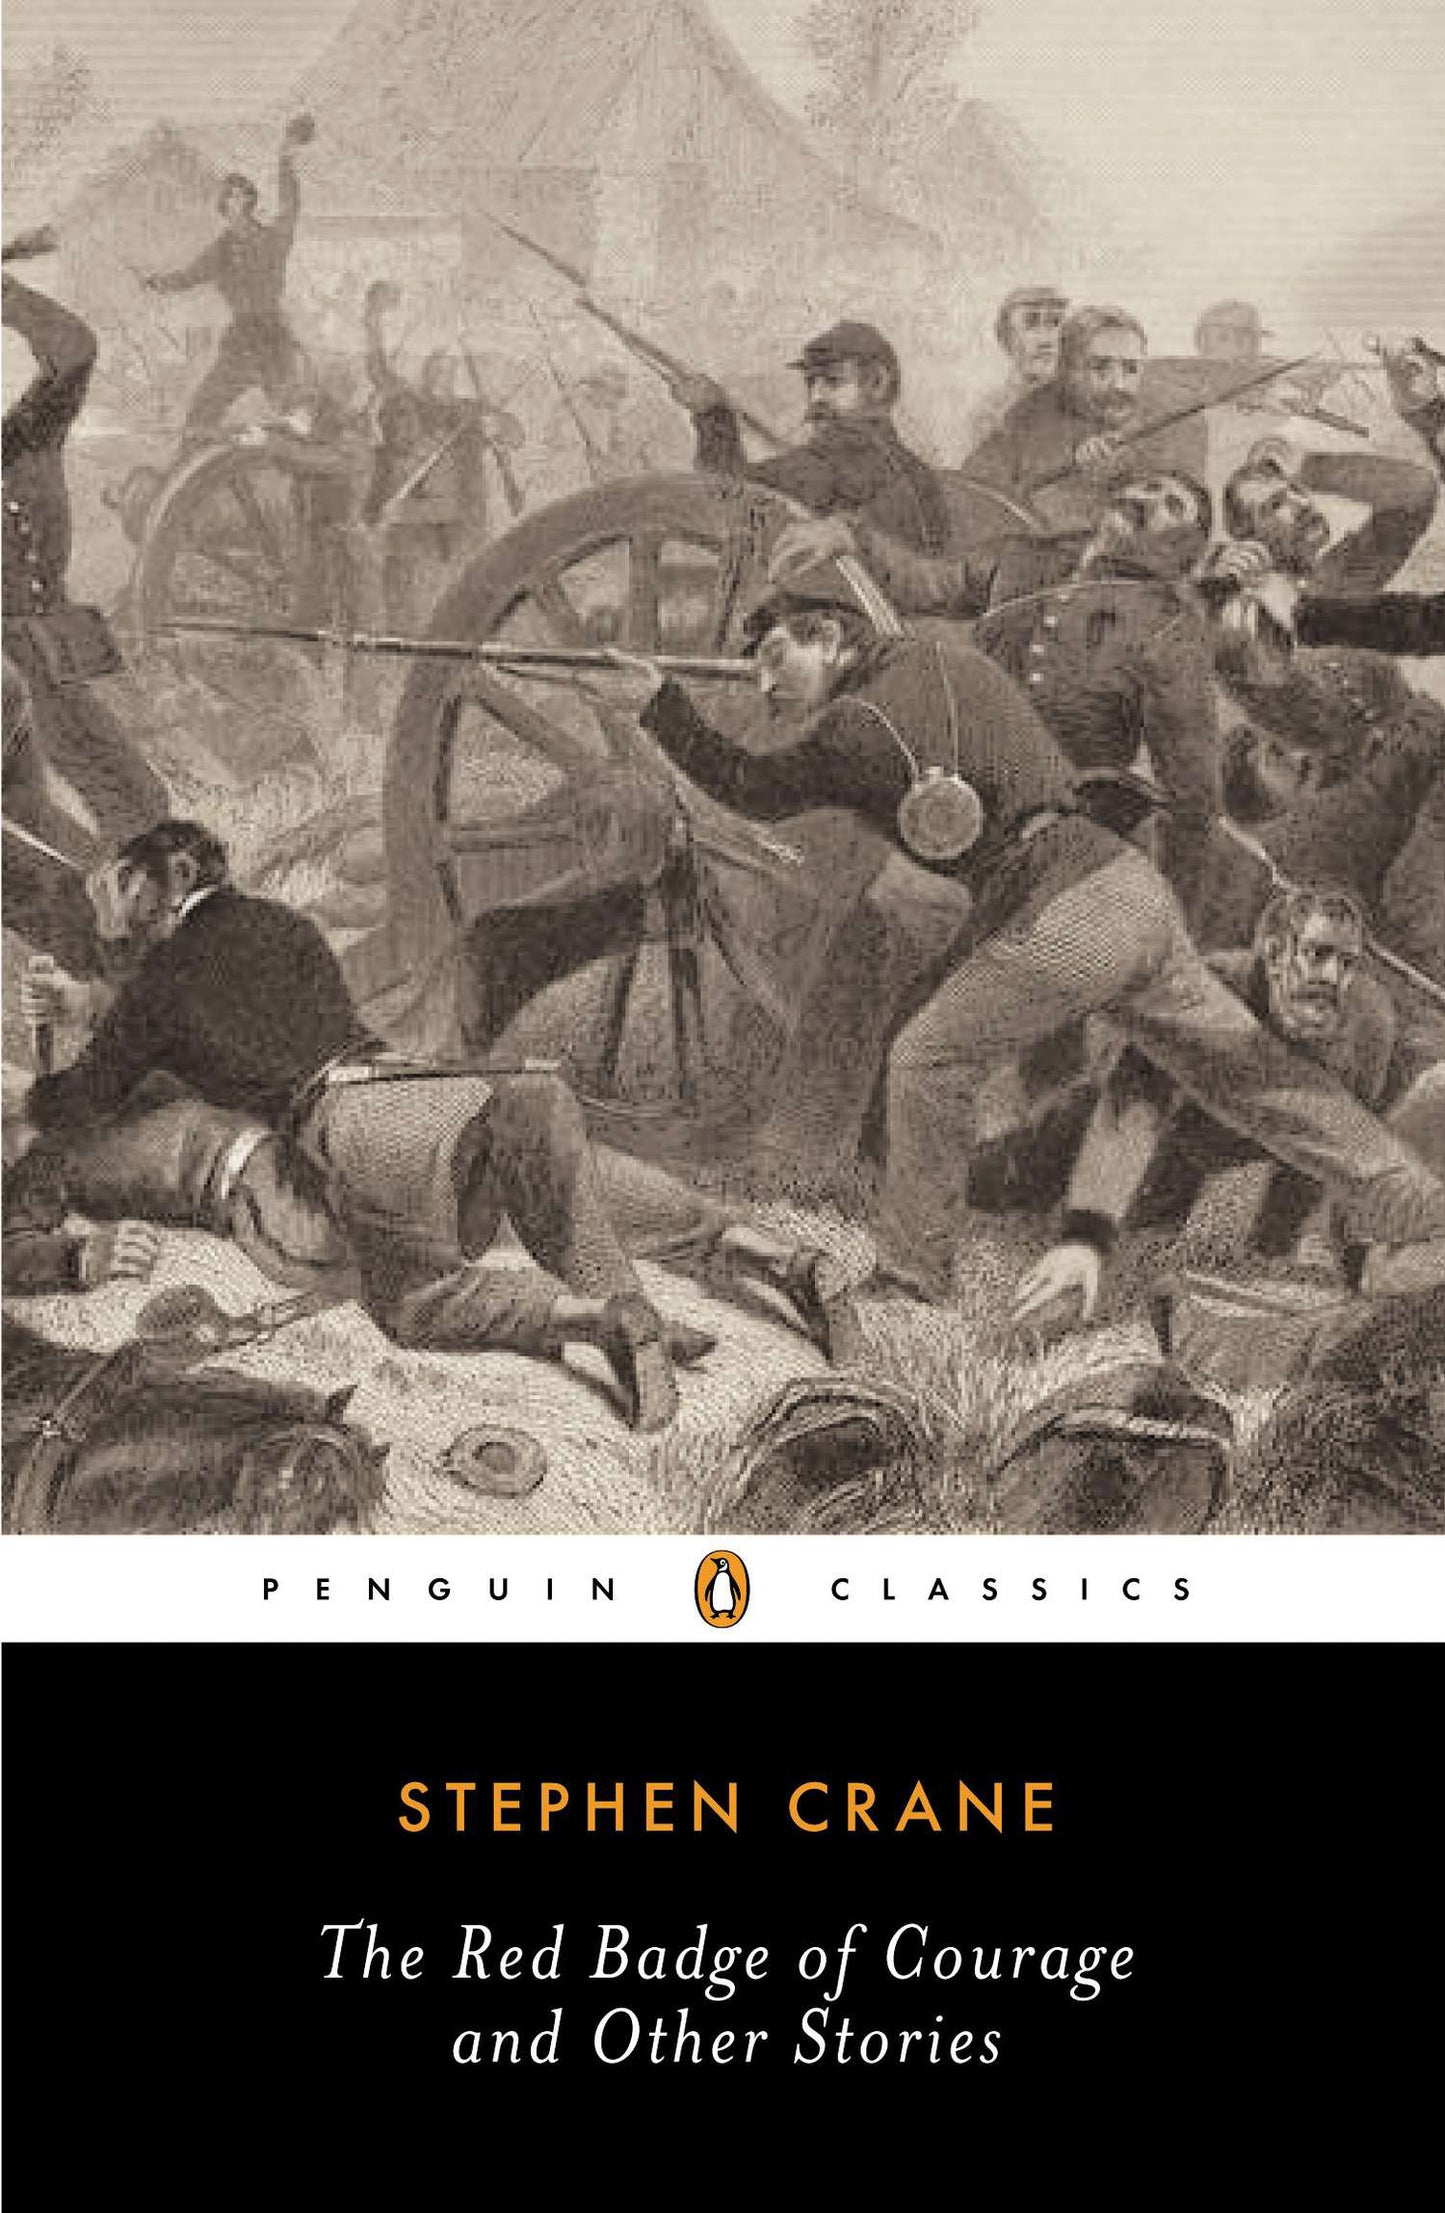 Red Badge of Courage and Other Stories, by Stephen Crane